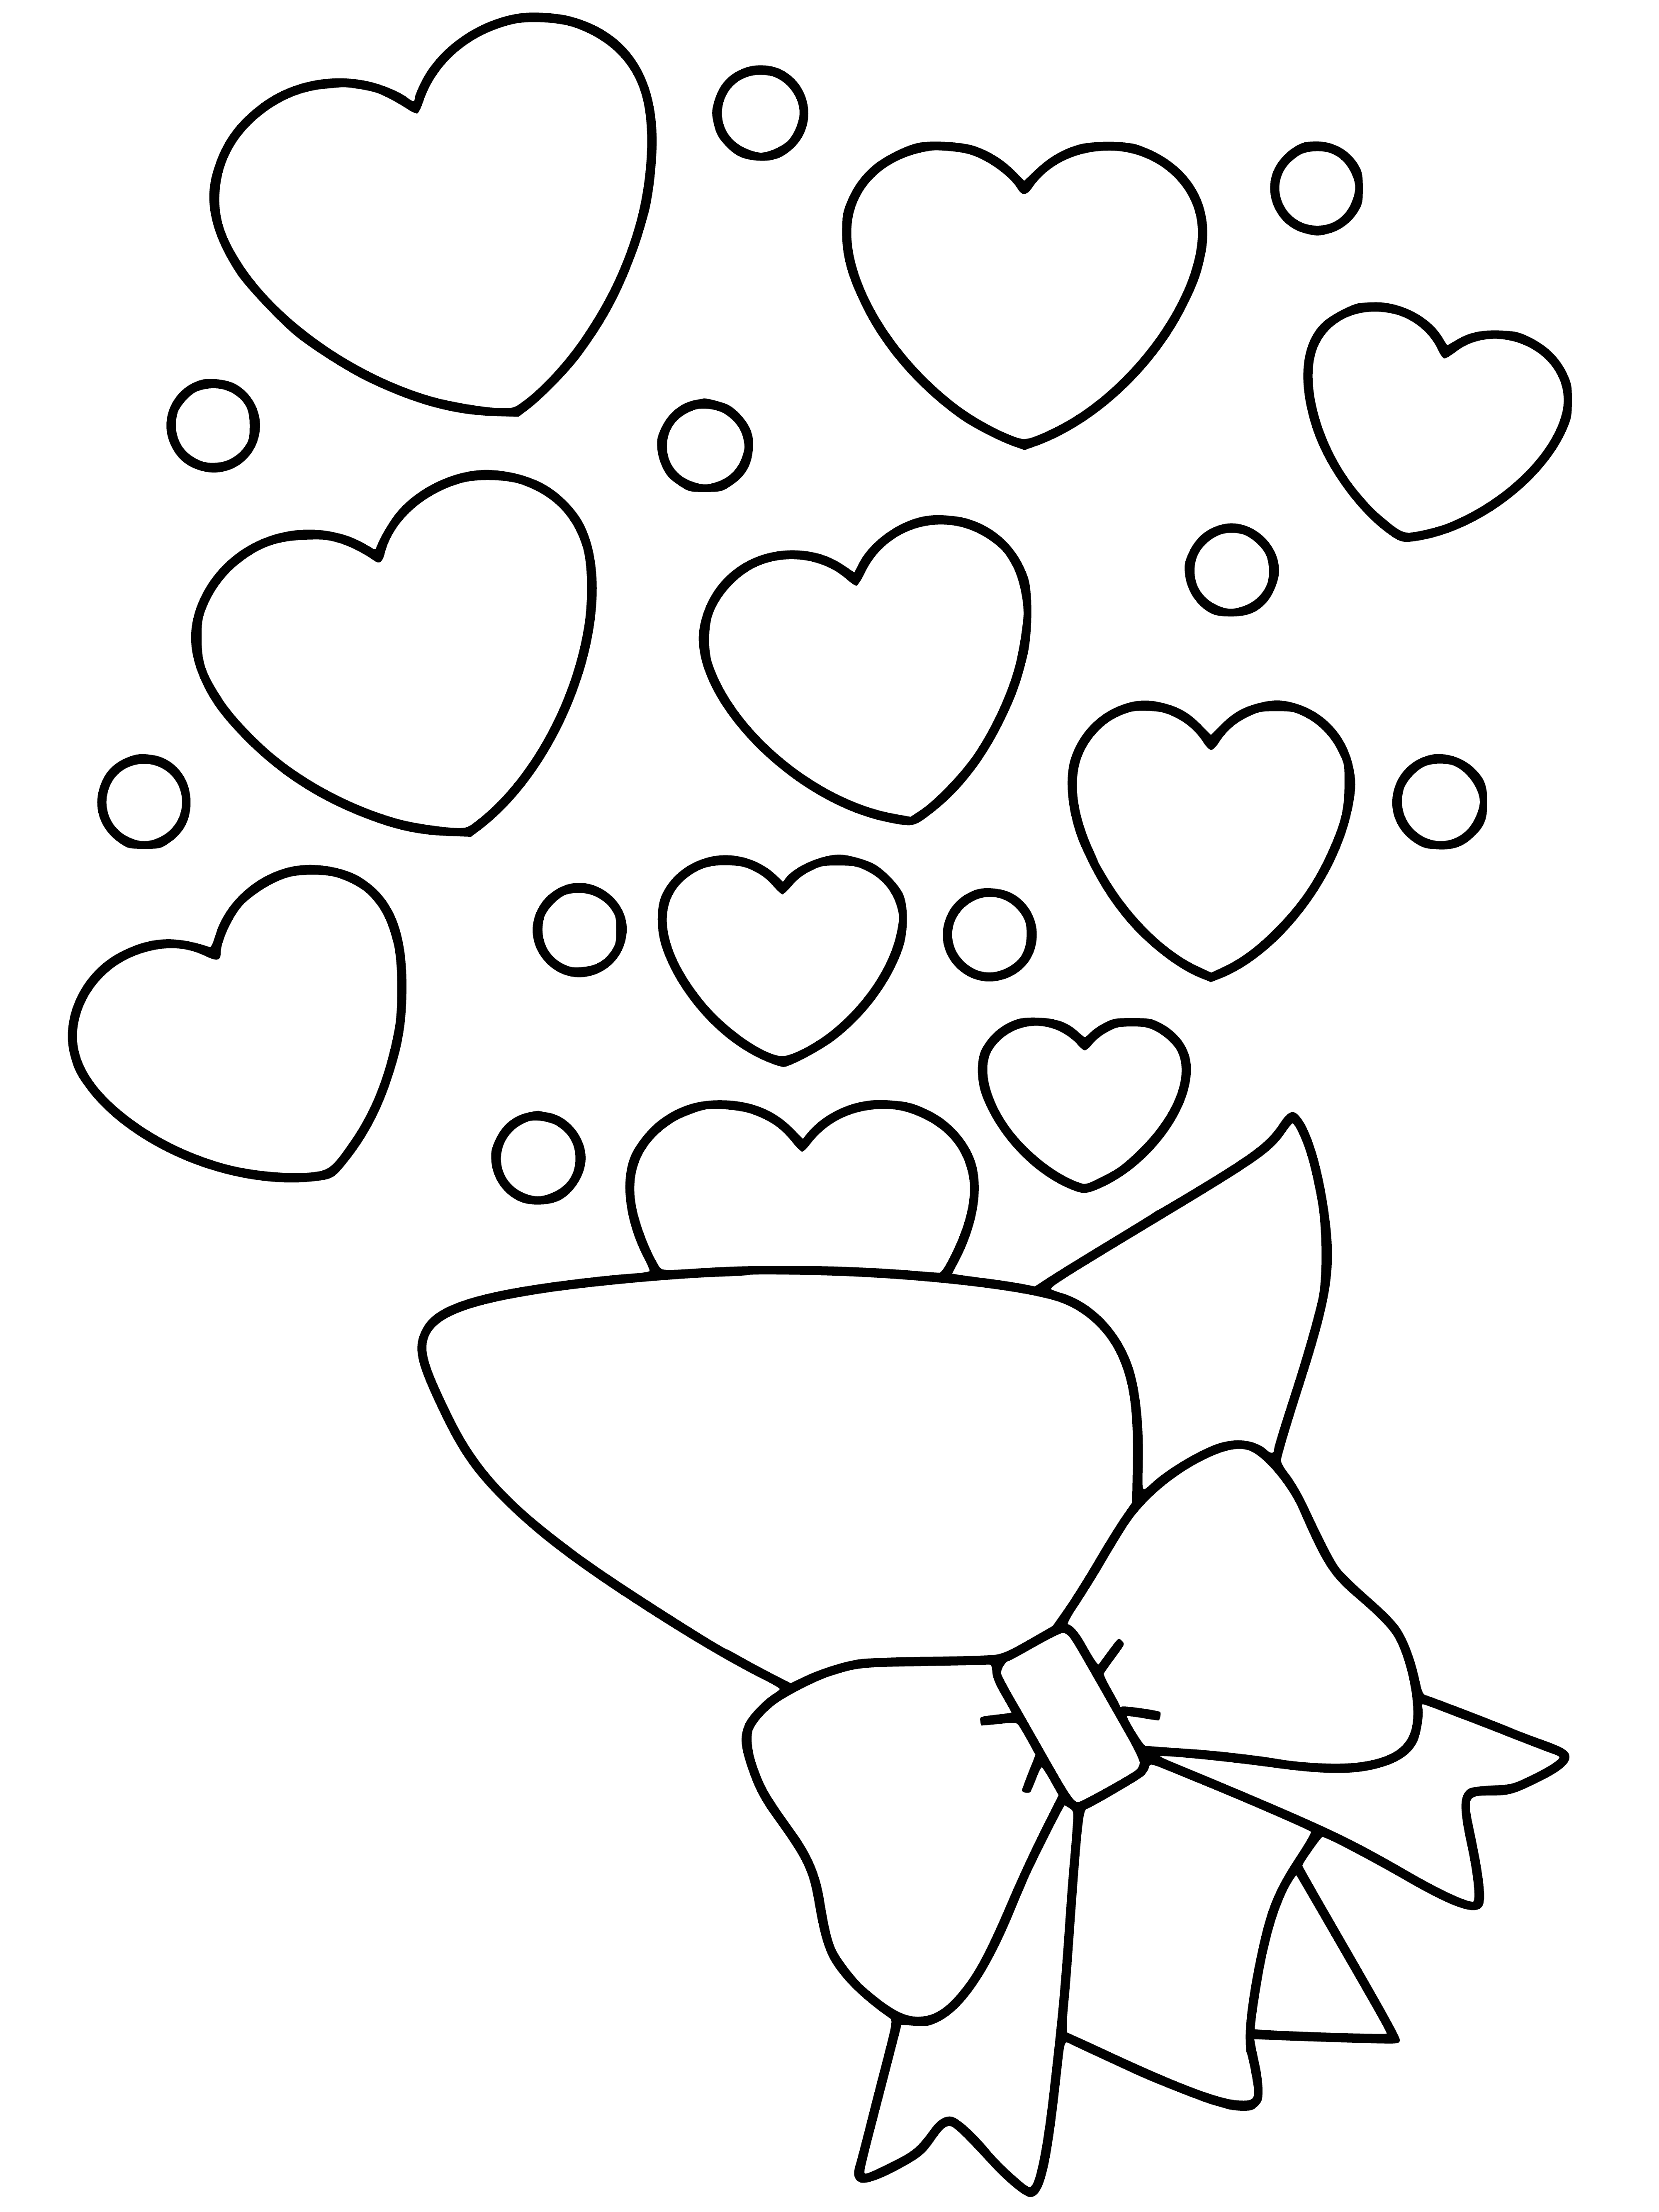 coloring page: A vase of red hearts sits on a light-colored surface, bringing a cheerful sight.